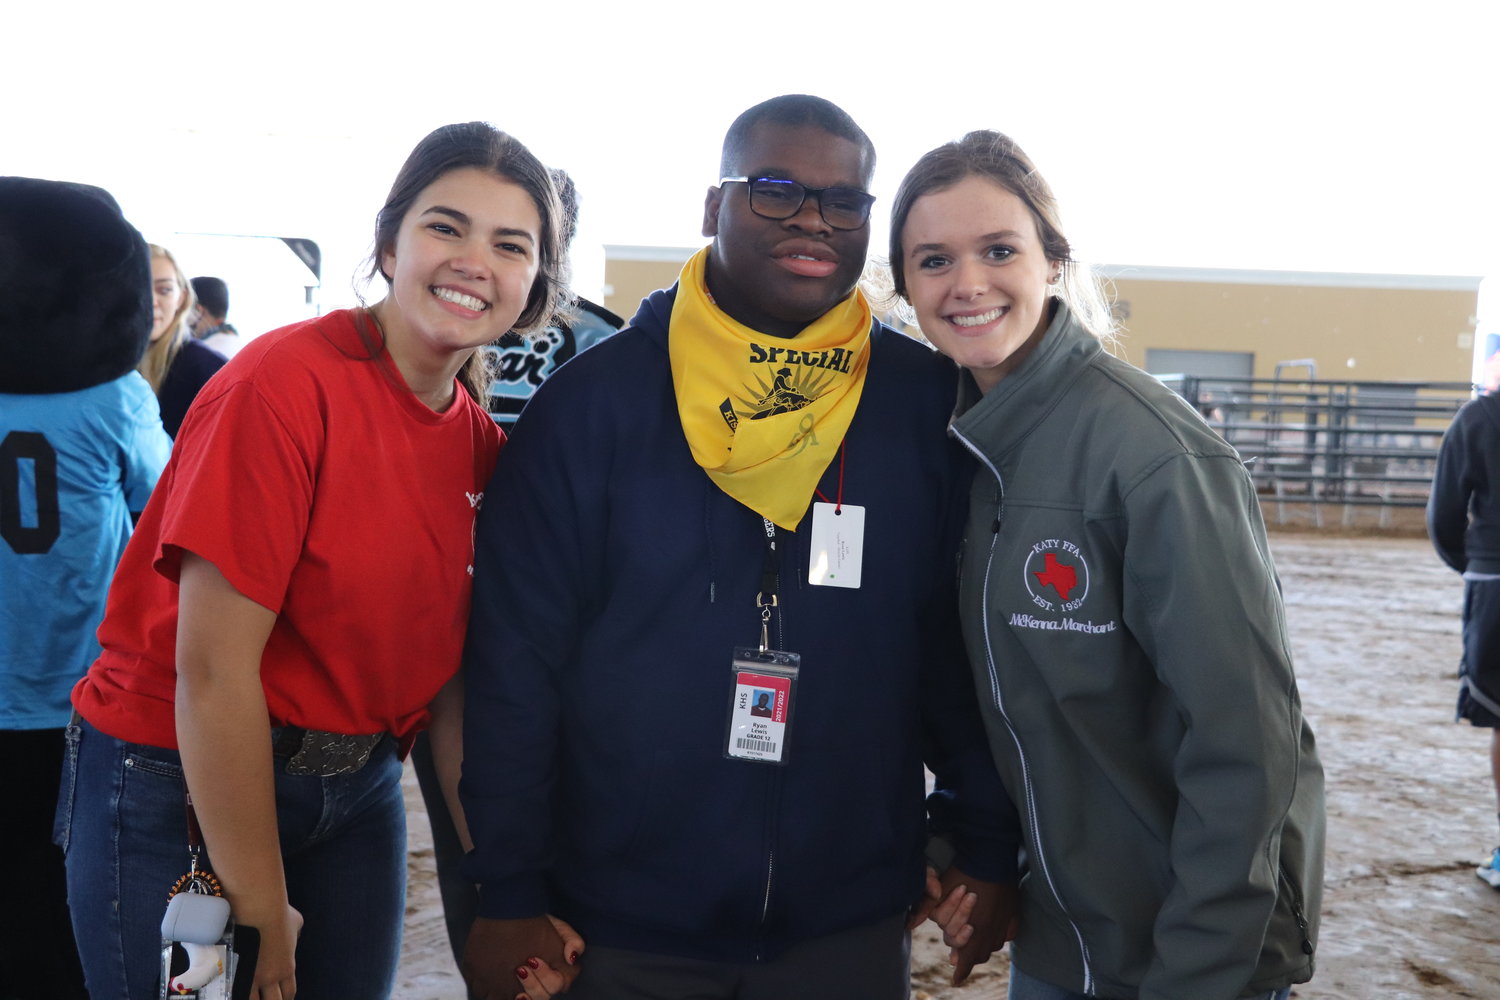 A life skills student poses with two student volunteers at the Katy Special Rodeo.